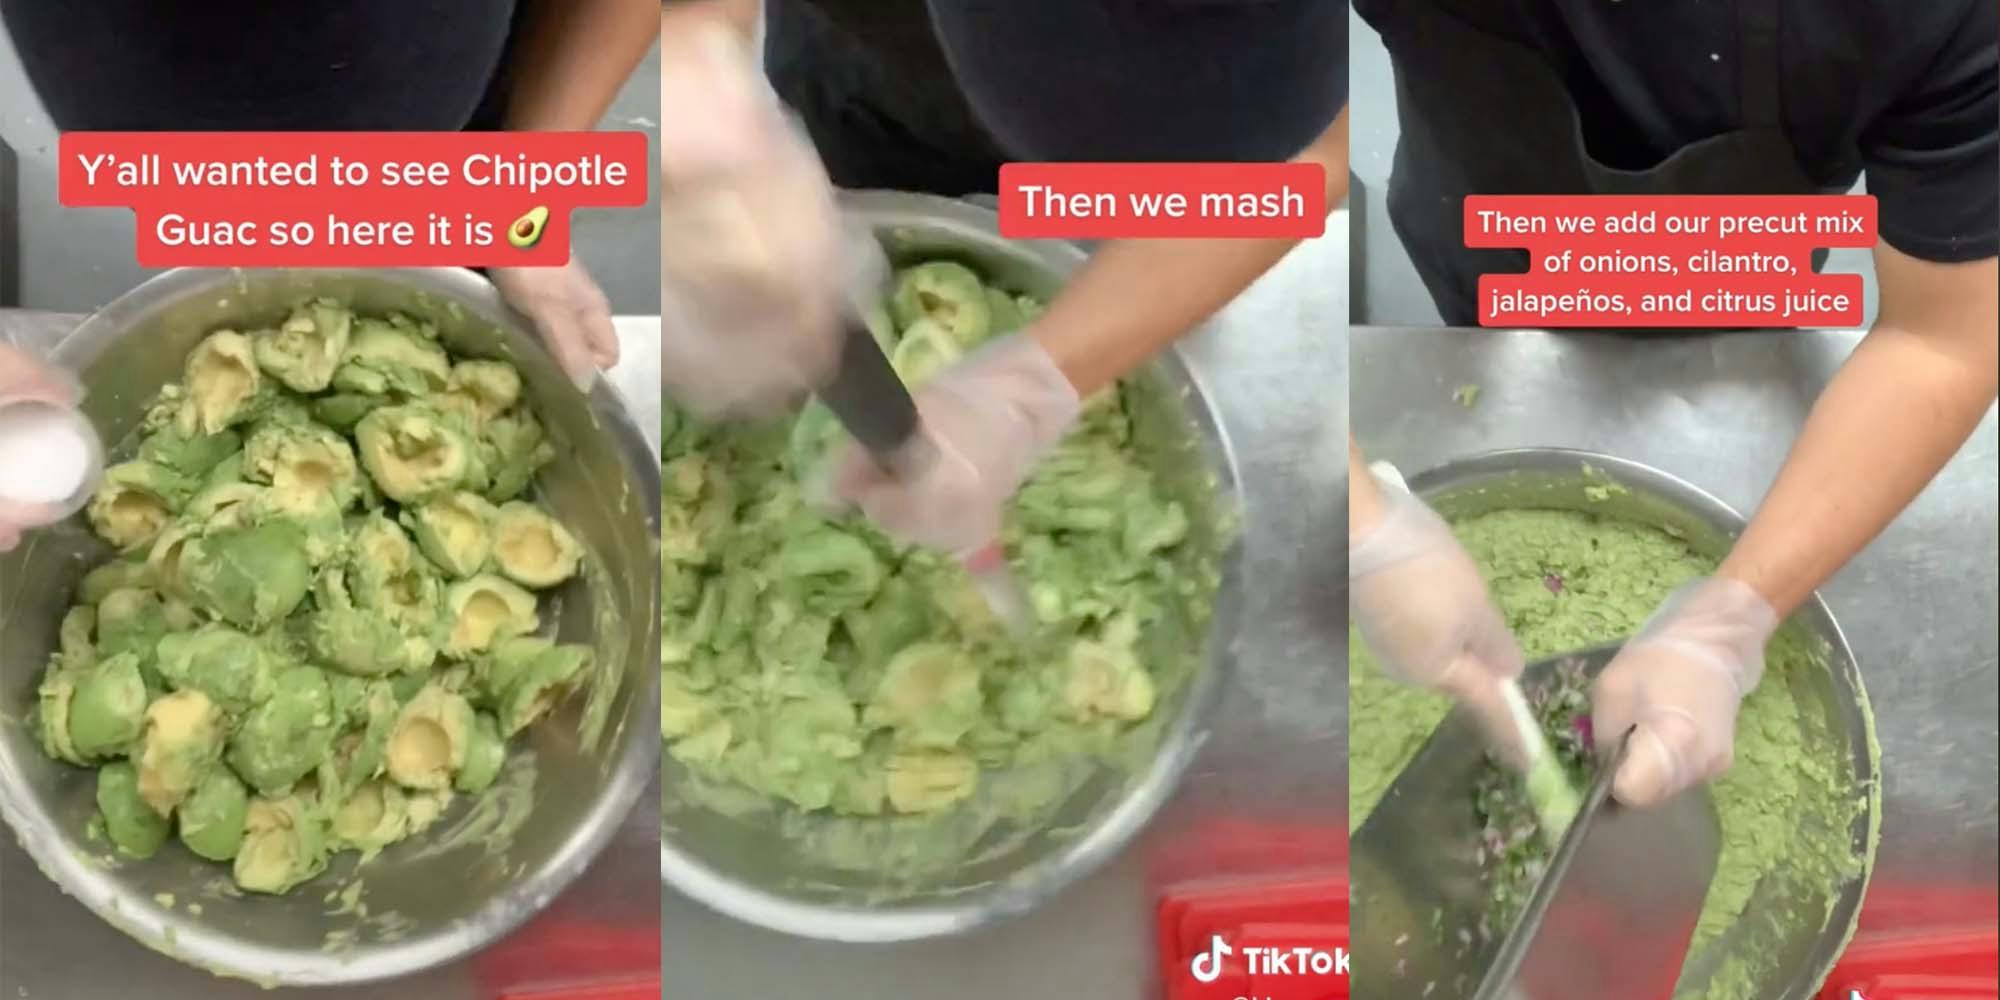 A TikToker who works at Chipotle shows how the restaurant makes guacamole.